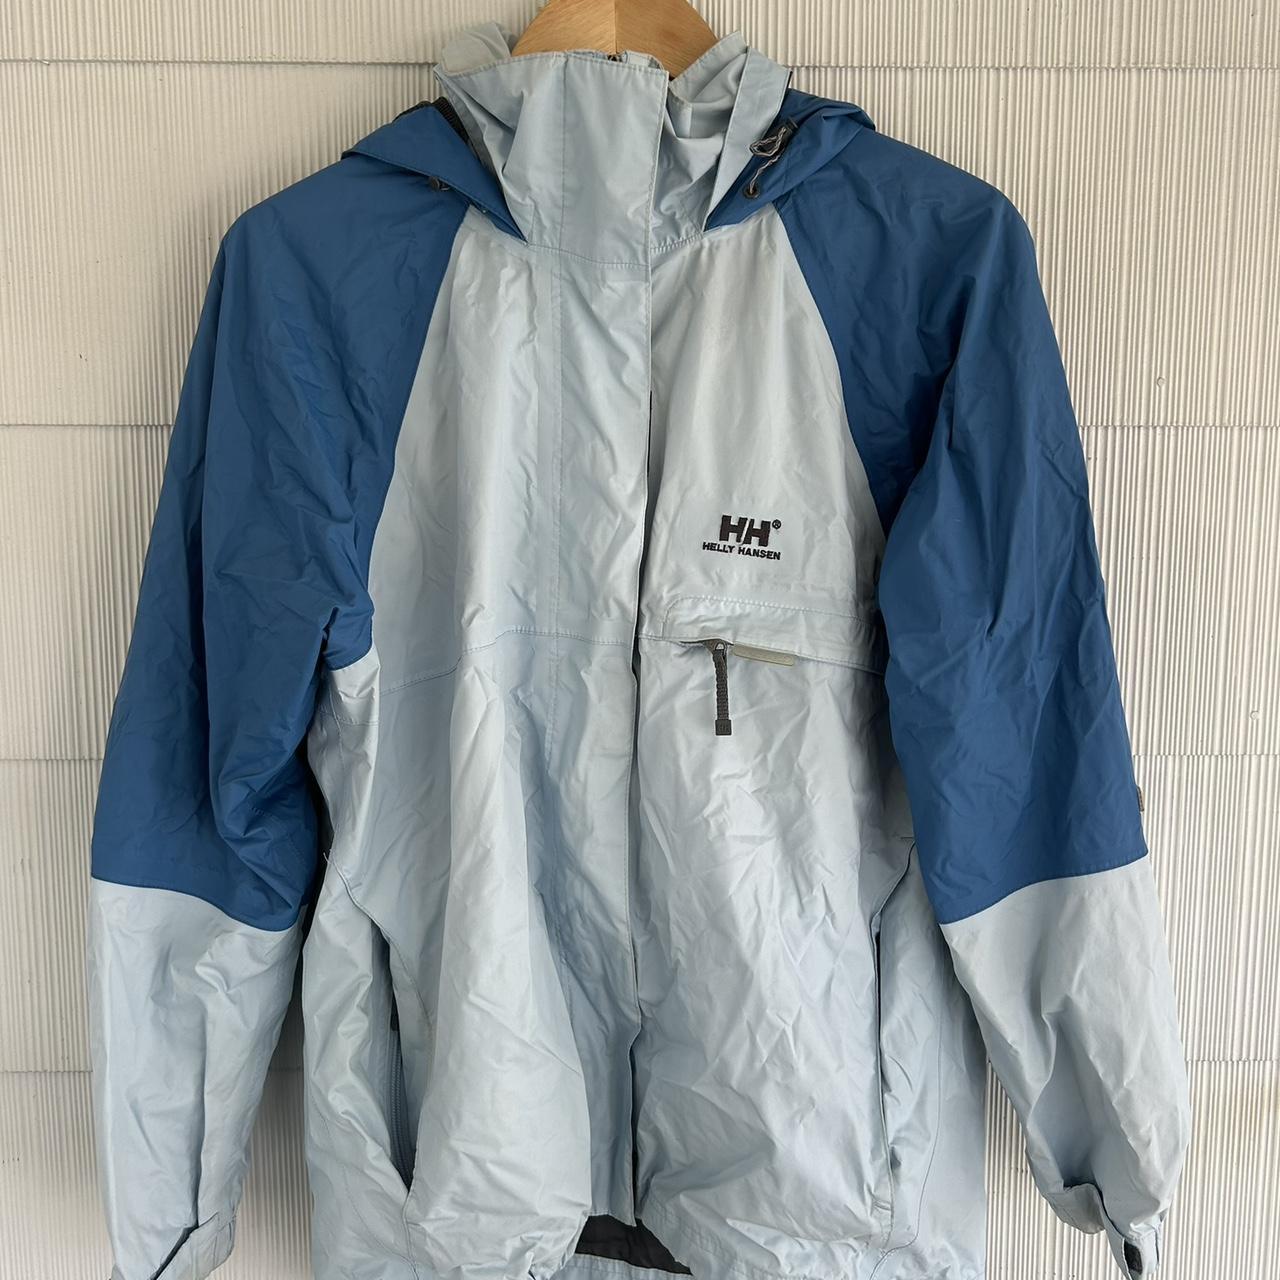 HUK Rain jacket Small stain on front - Depop